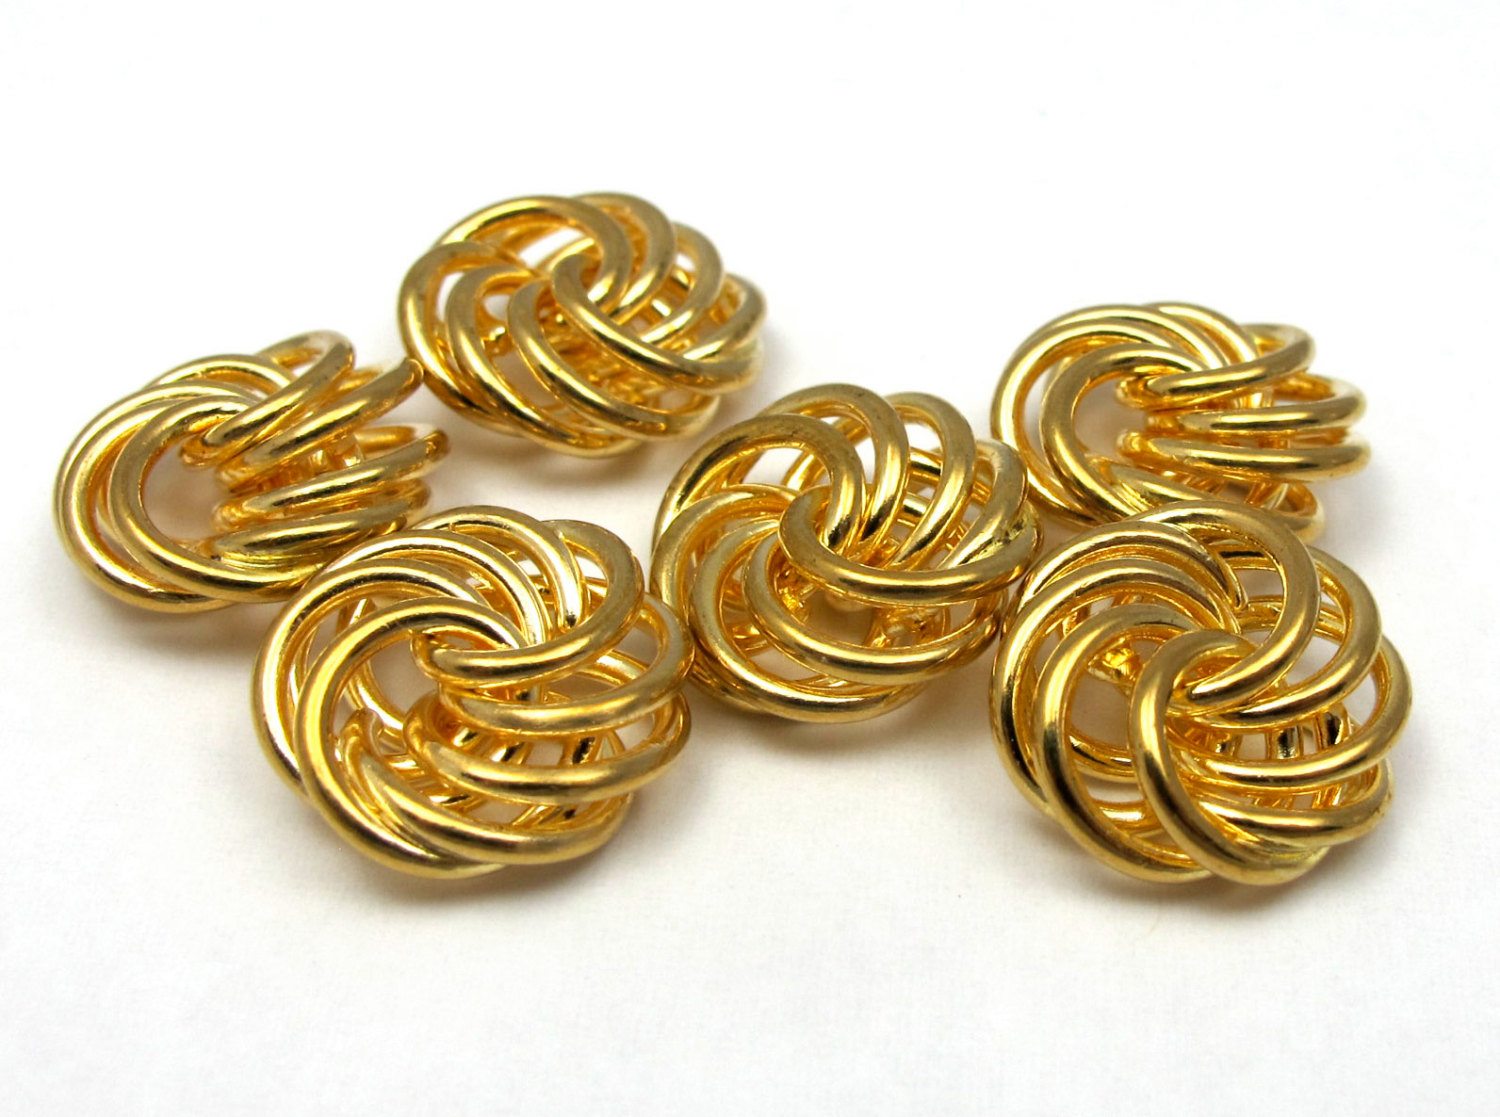 Vintage Gold Plated Spiral Knot Charms | Brooklyn Charm